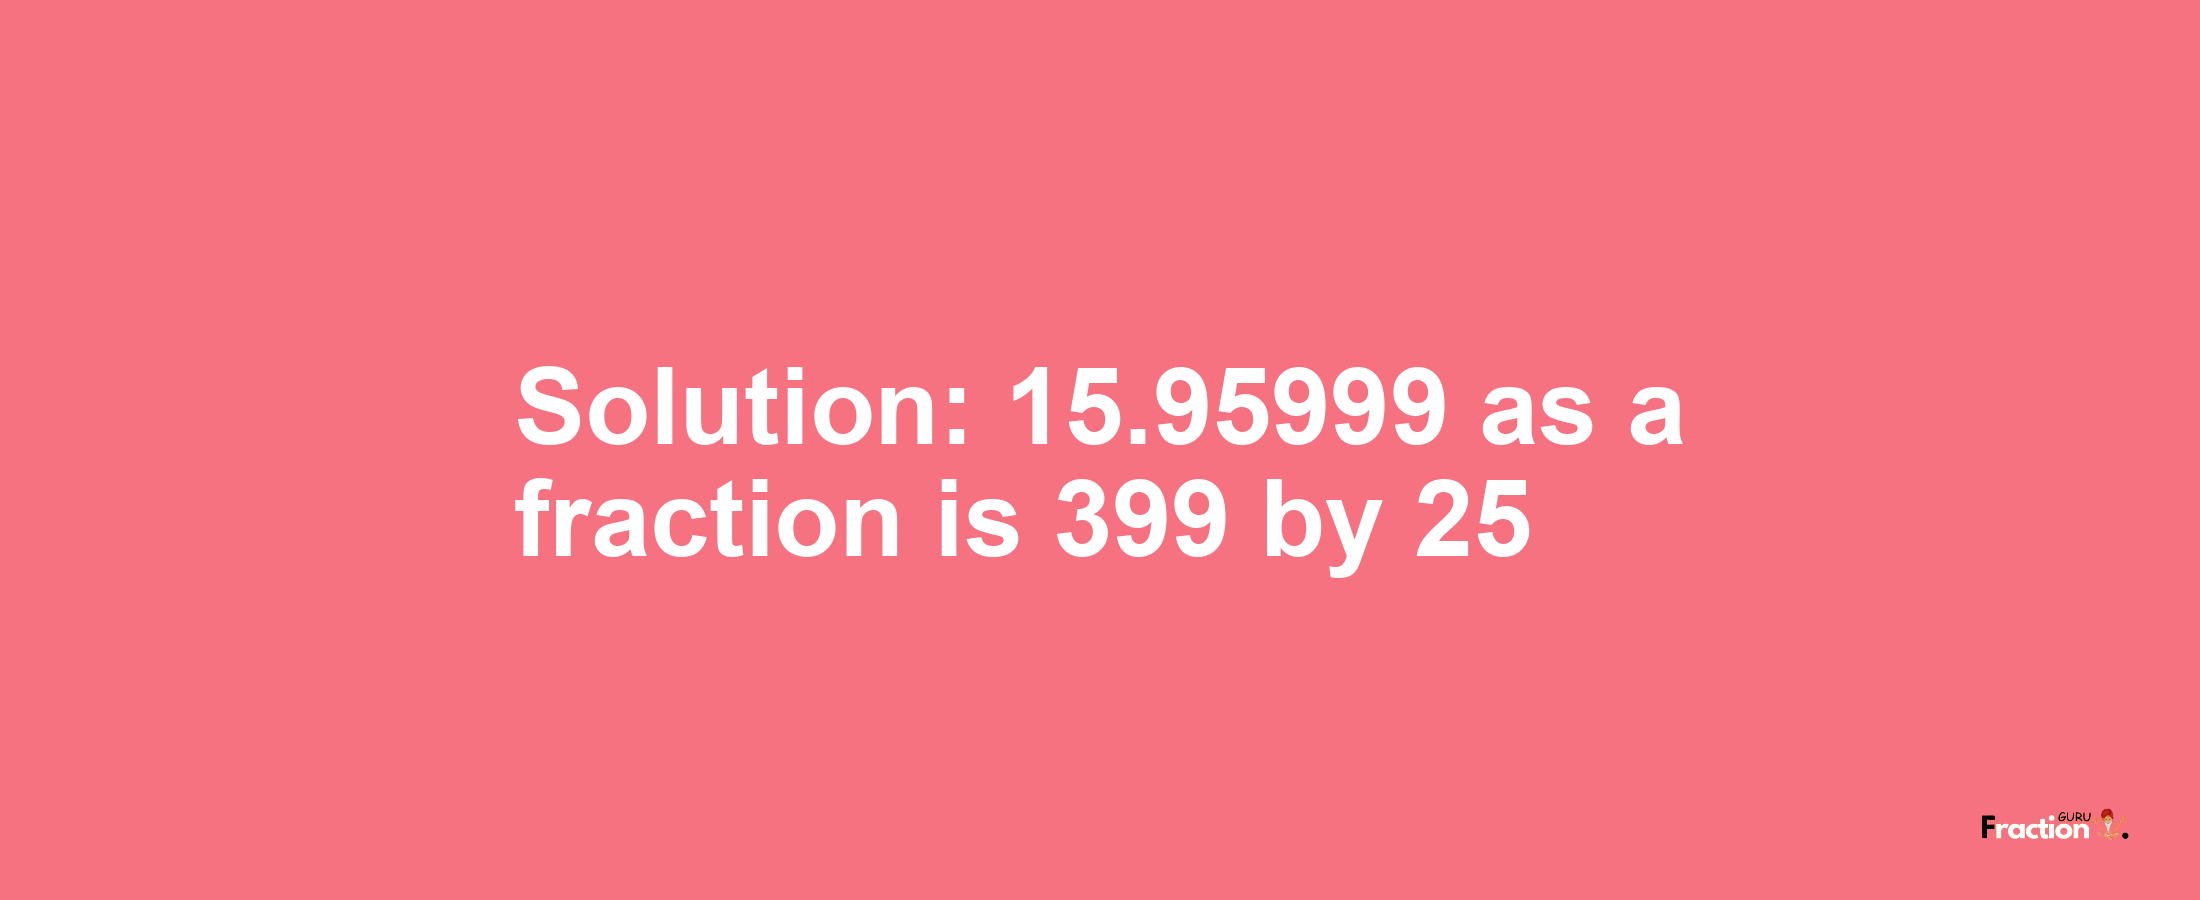 Solution:15.95999 as a fraction is 399/25